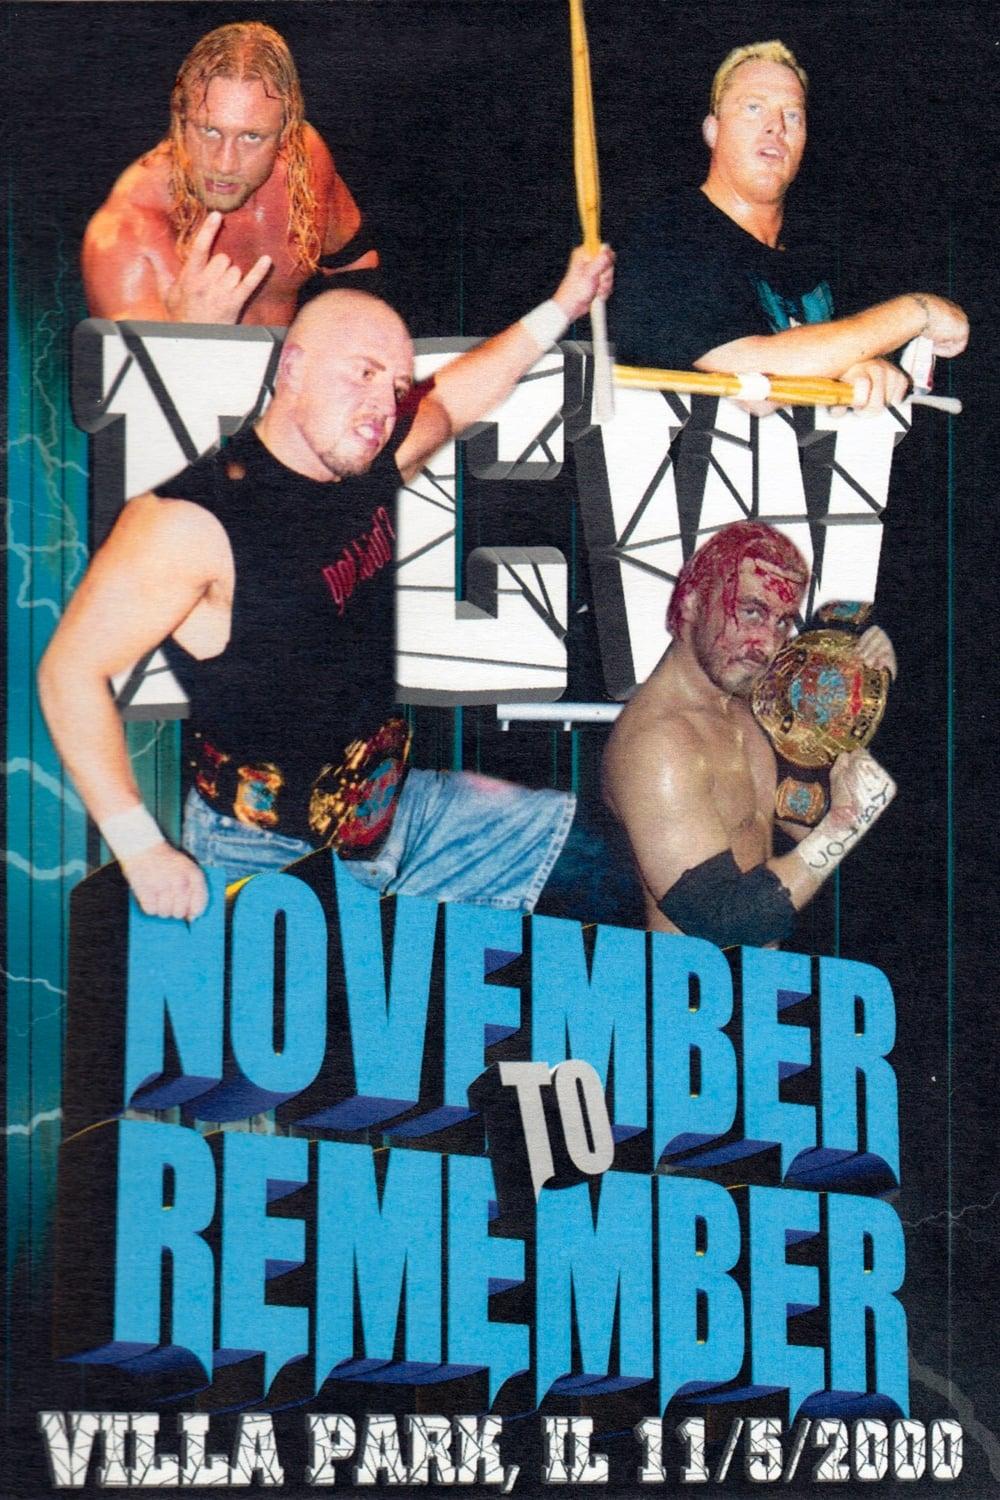 ECW November to Remember 2000 poster